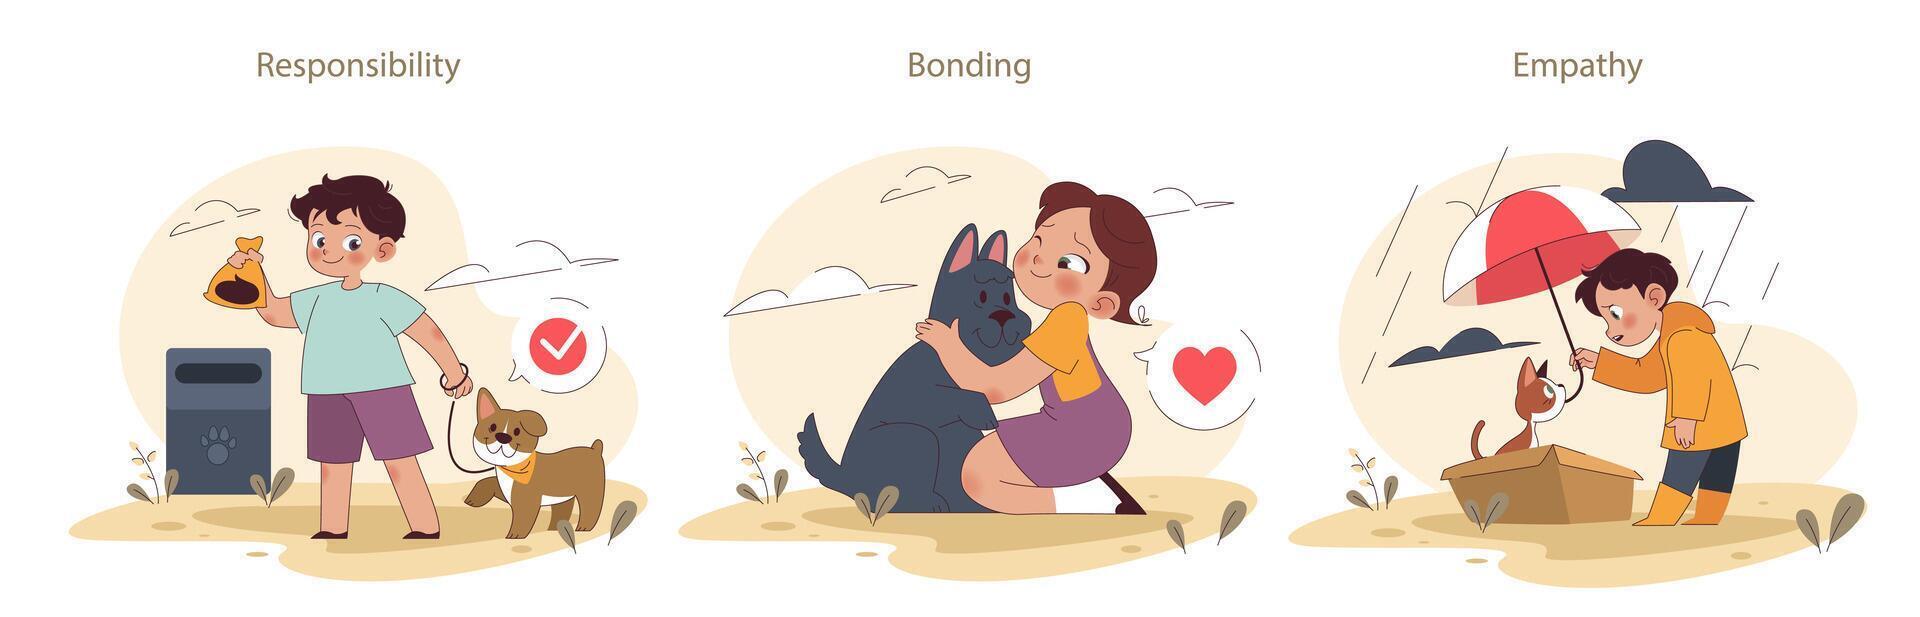 Children and pets set. Exploring responsibilities and joys of pet ownership vector